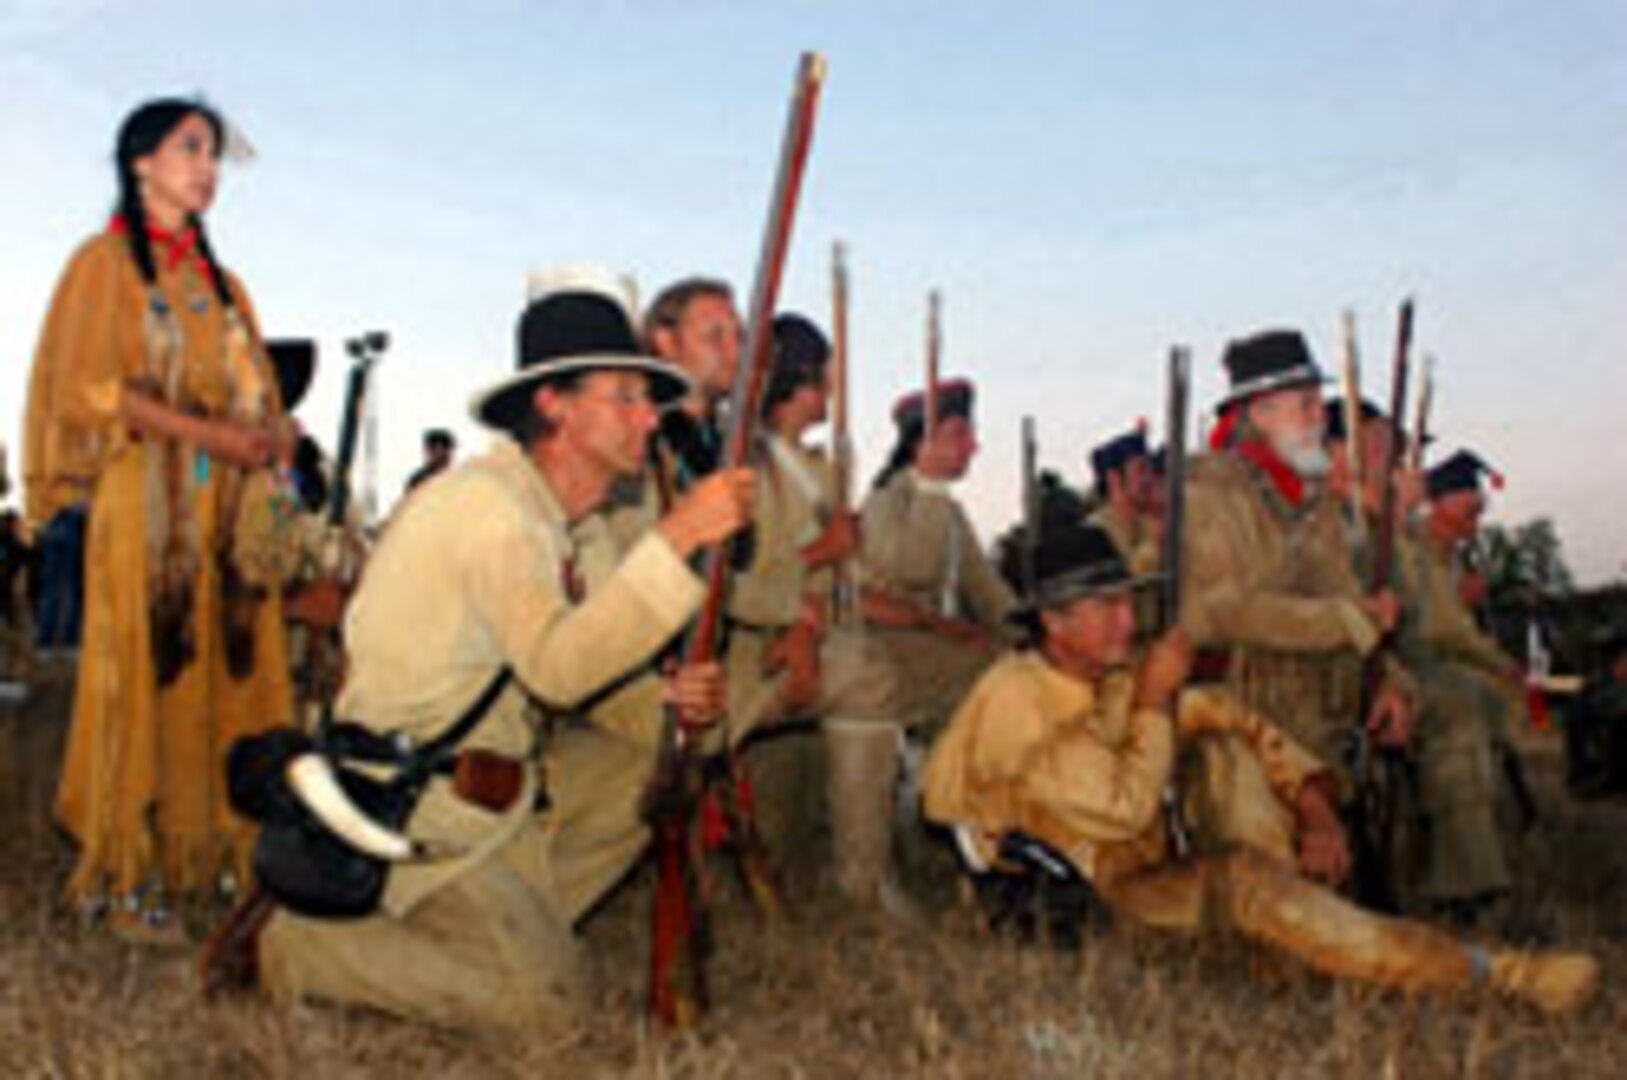 Re-enactors wait to welcome participants in the Lewis & Clark Youth Rendezvous sponsored by the National Guard at Fort Abraham Lincoln State Park in North Dakota in mid-August. About 300 high school students from all 50 states and four territories attended the weeklong celebration of the bicentennial of the Lewis and Clark Expedition.